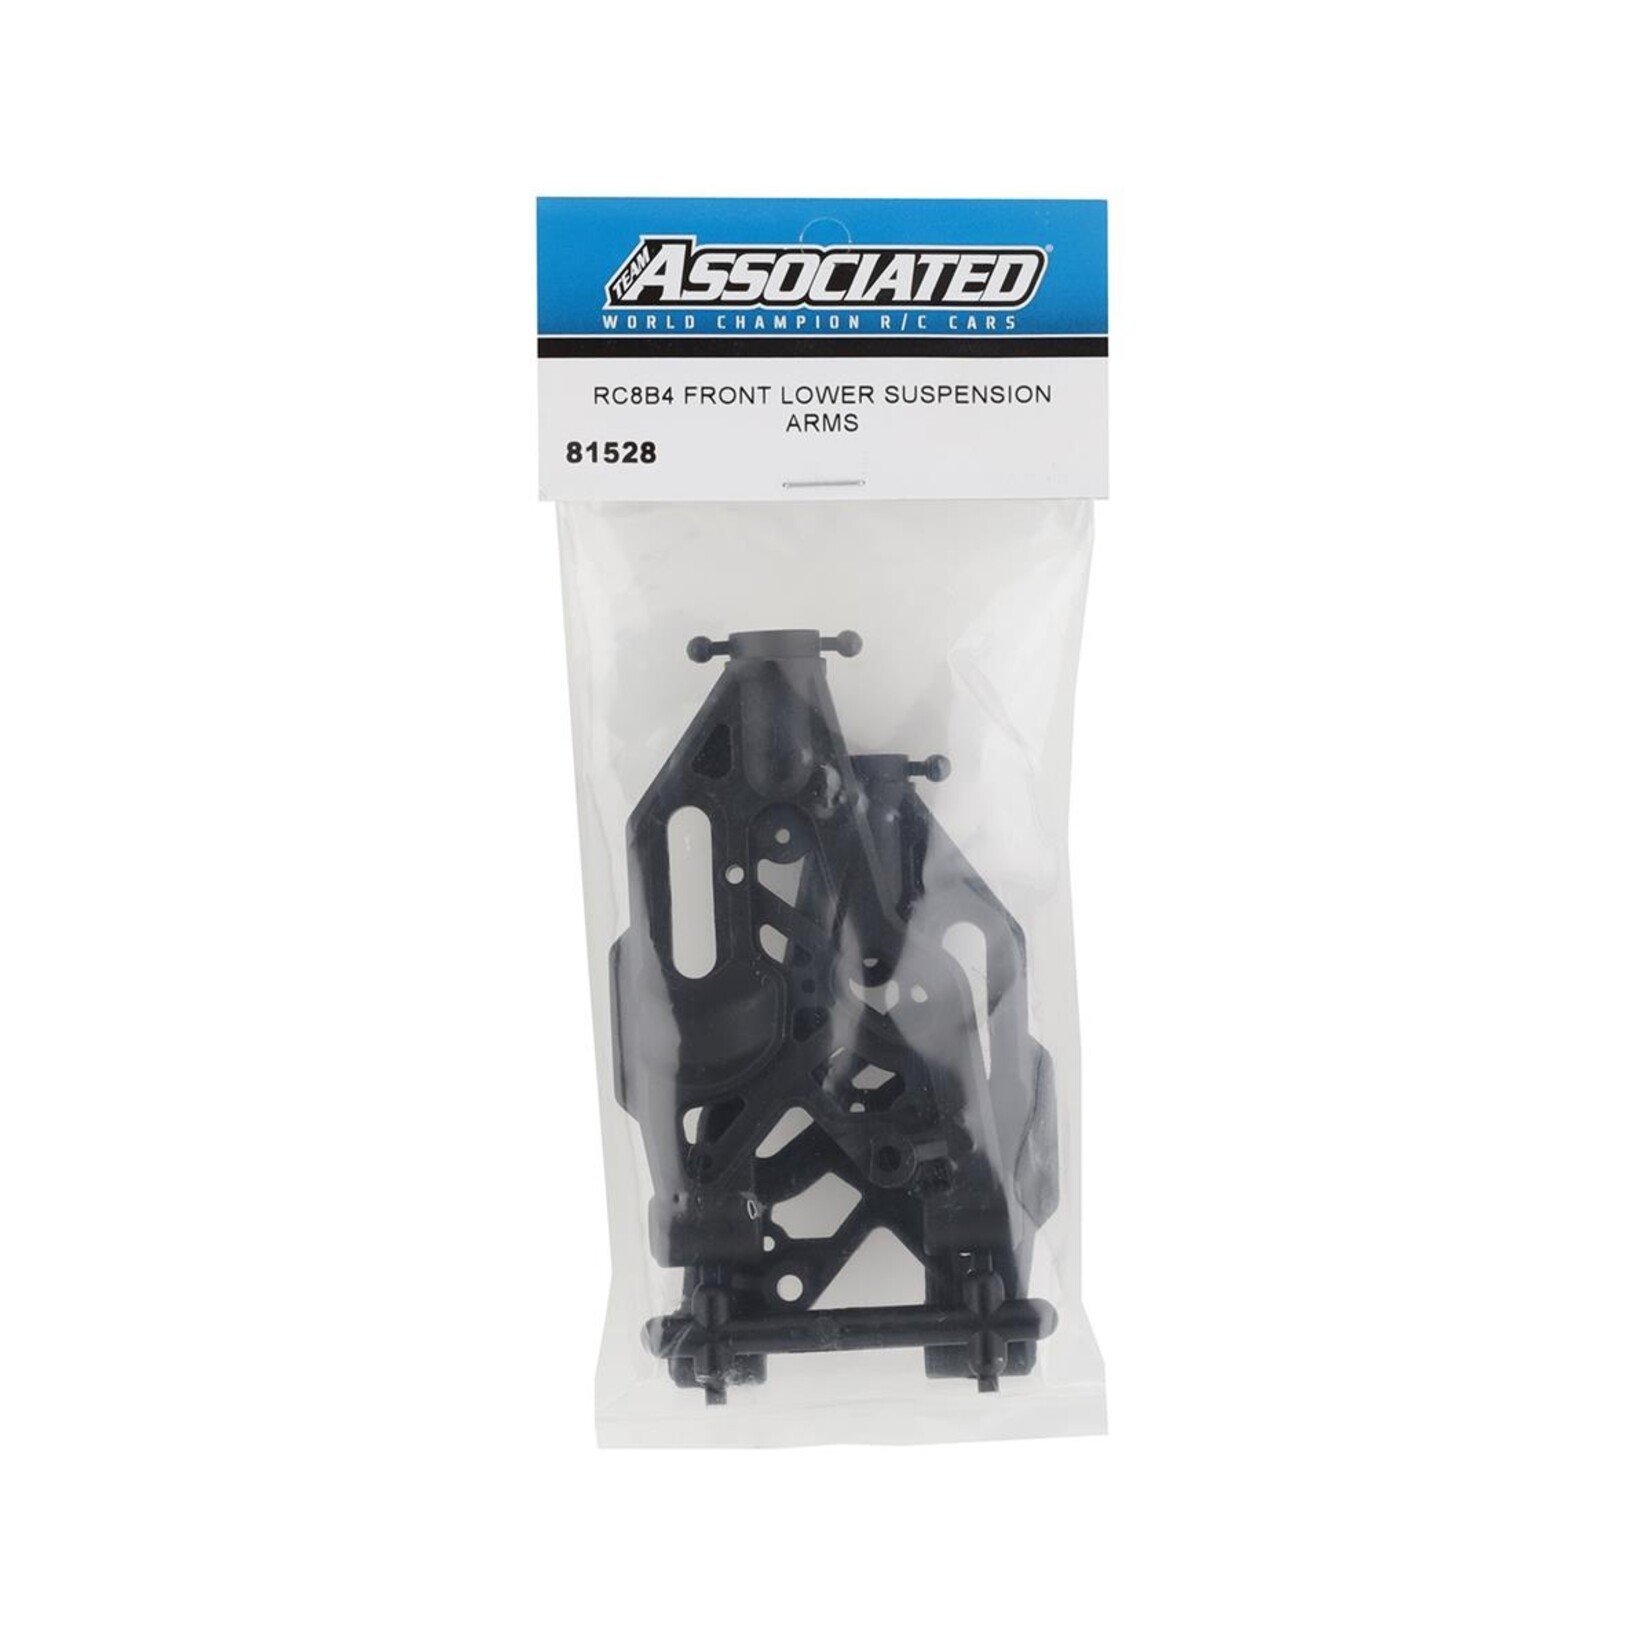 Team Associated Team Associated RC8B4/RC8B4e Front Lower Suspension Arms (2) #81528